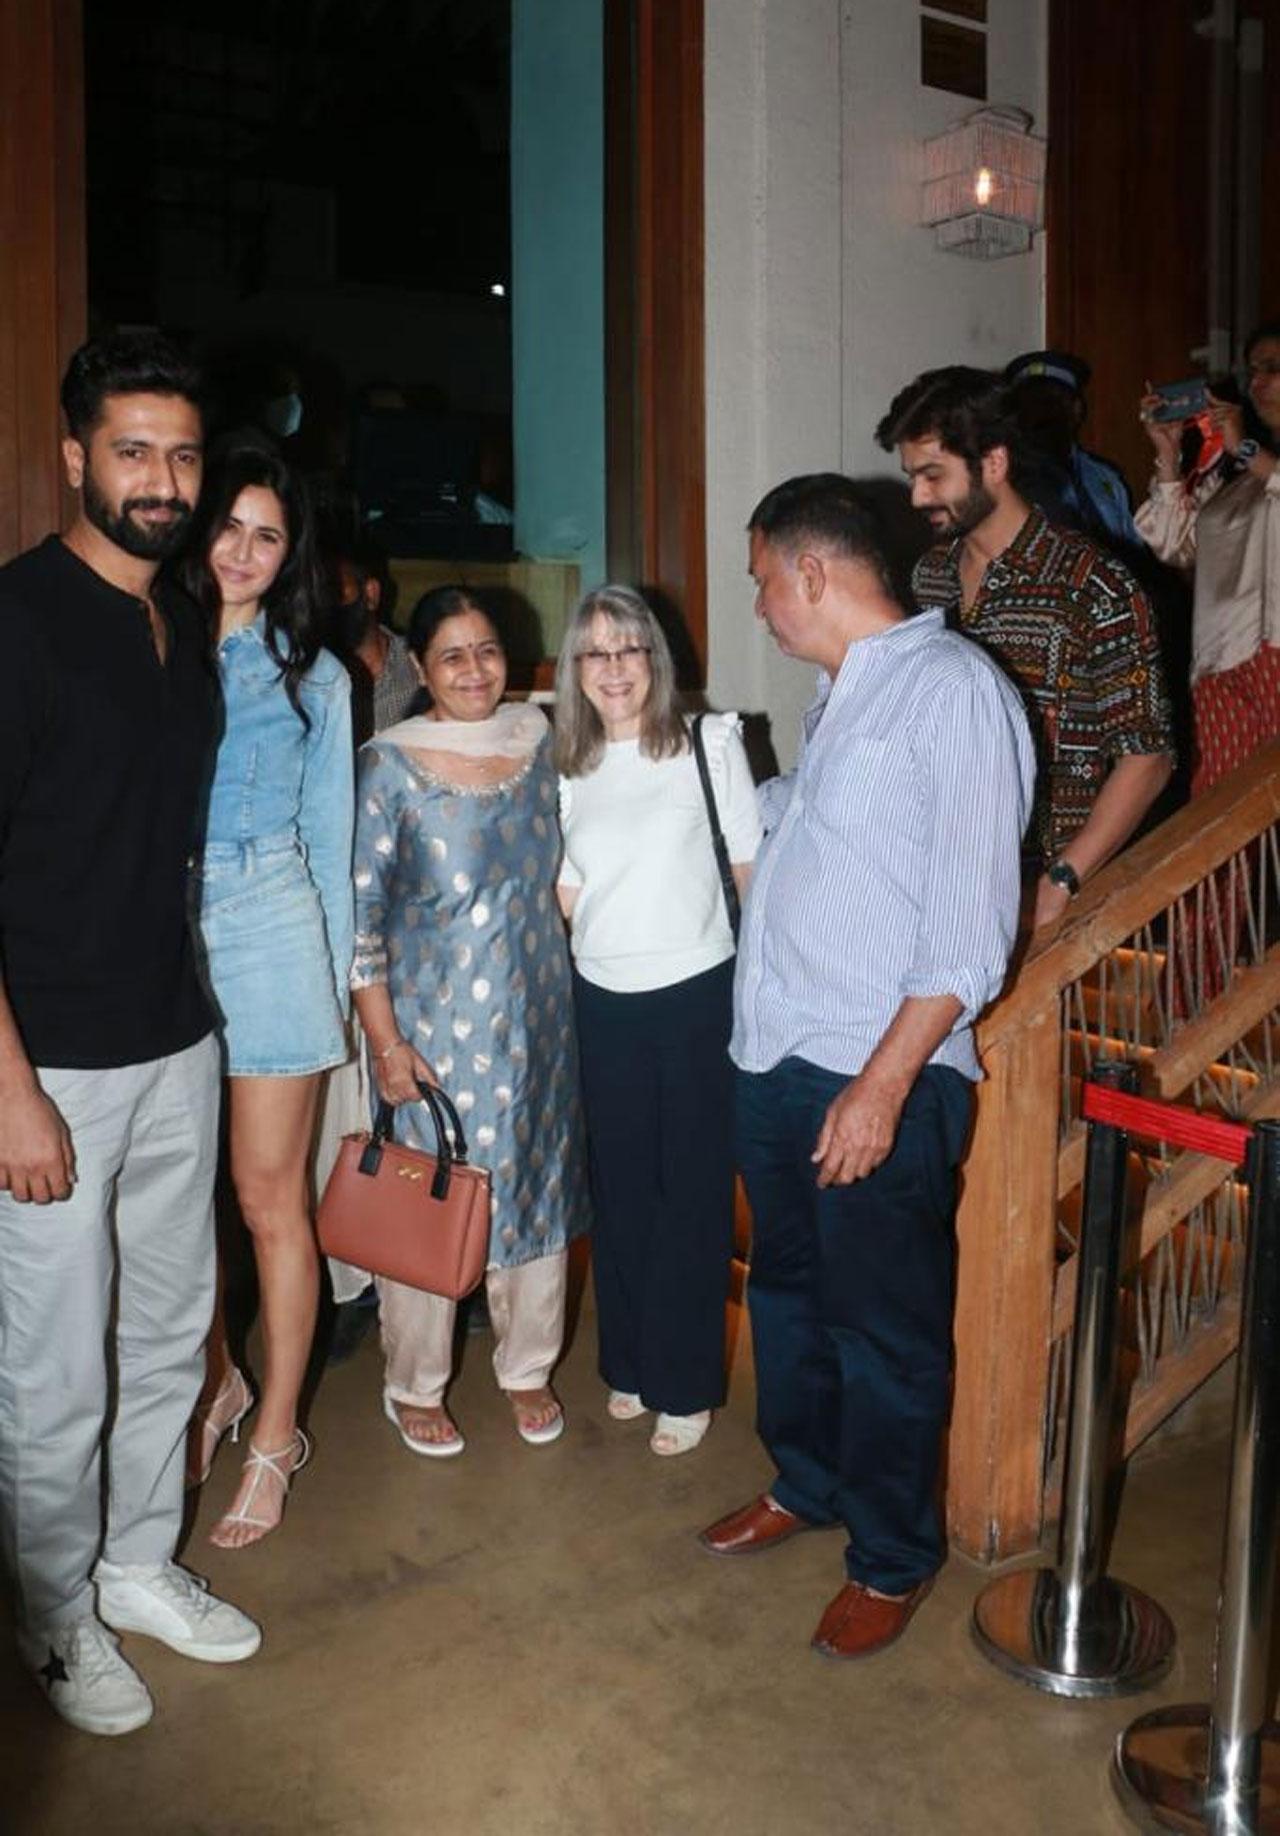 Katrina Kaif and Vicky Kaushal were spotted together as they stepped out for dinner with family. Going by the pictures, this is the Batian restaurant located at Worli that has become the hub of celebrity dinners since it has opened. 